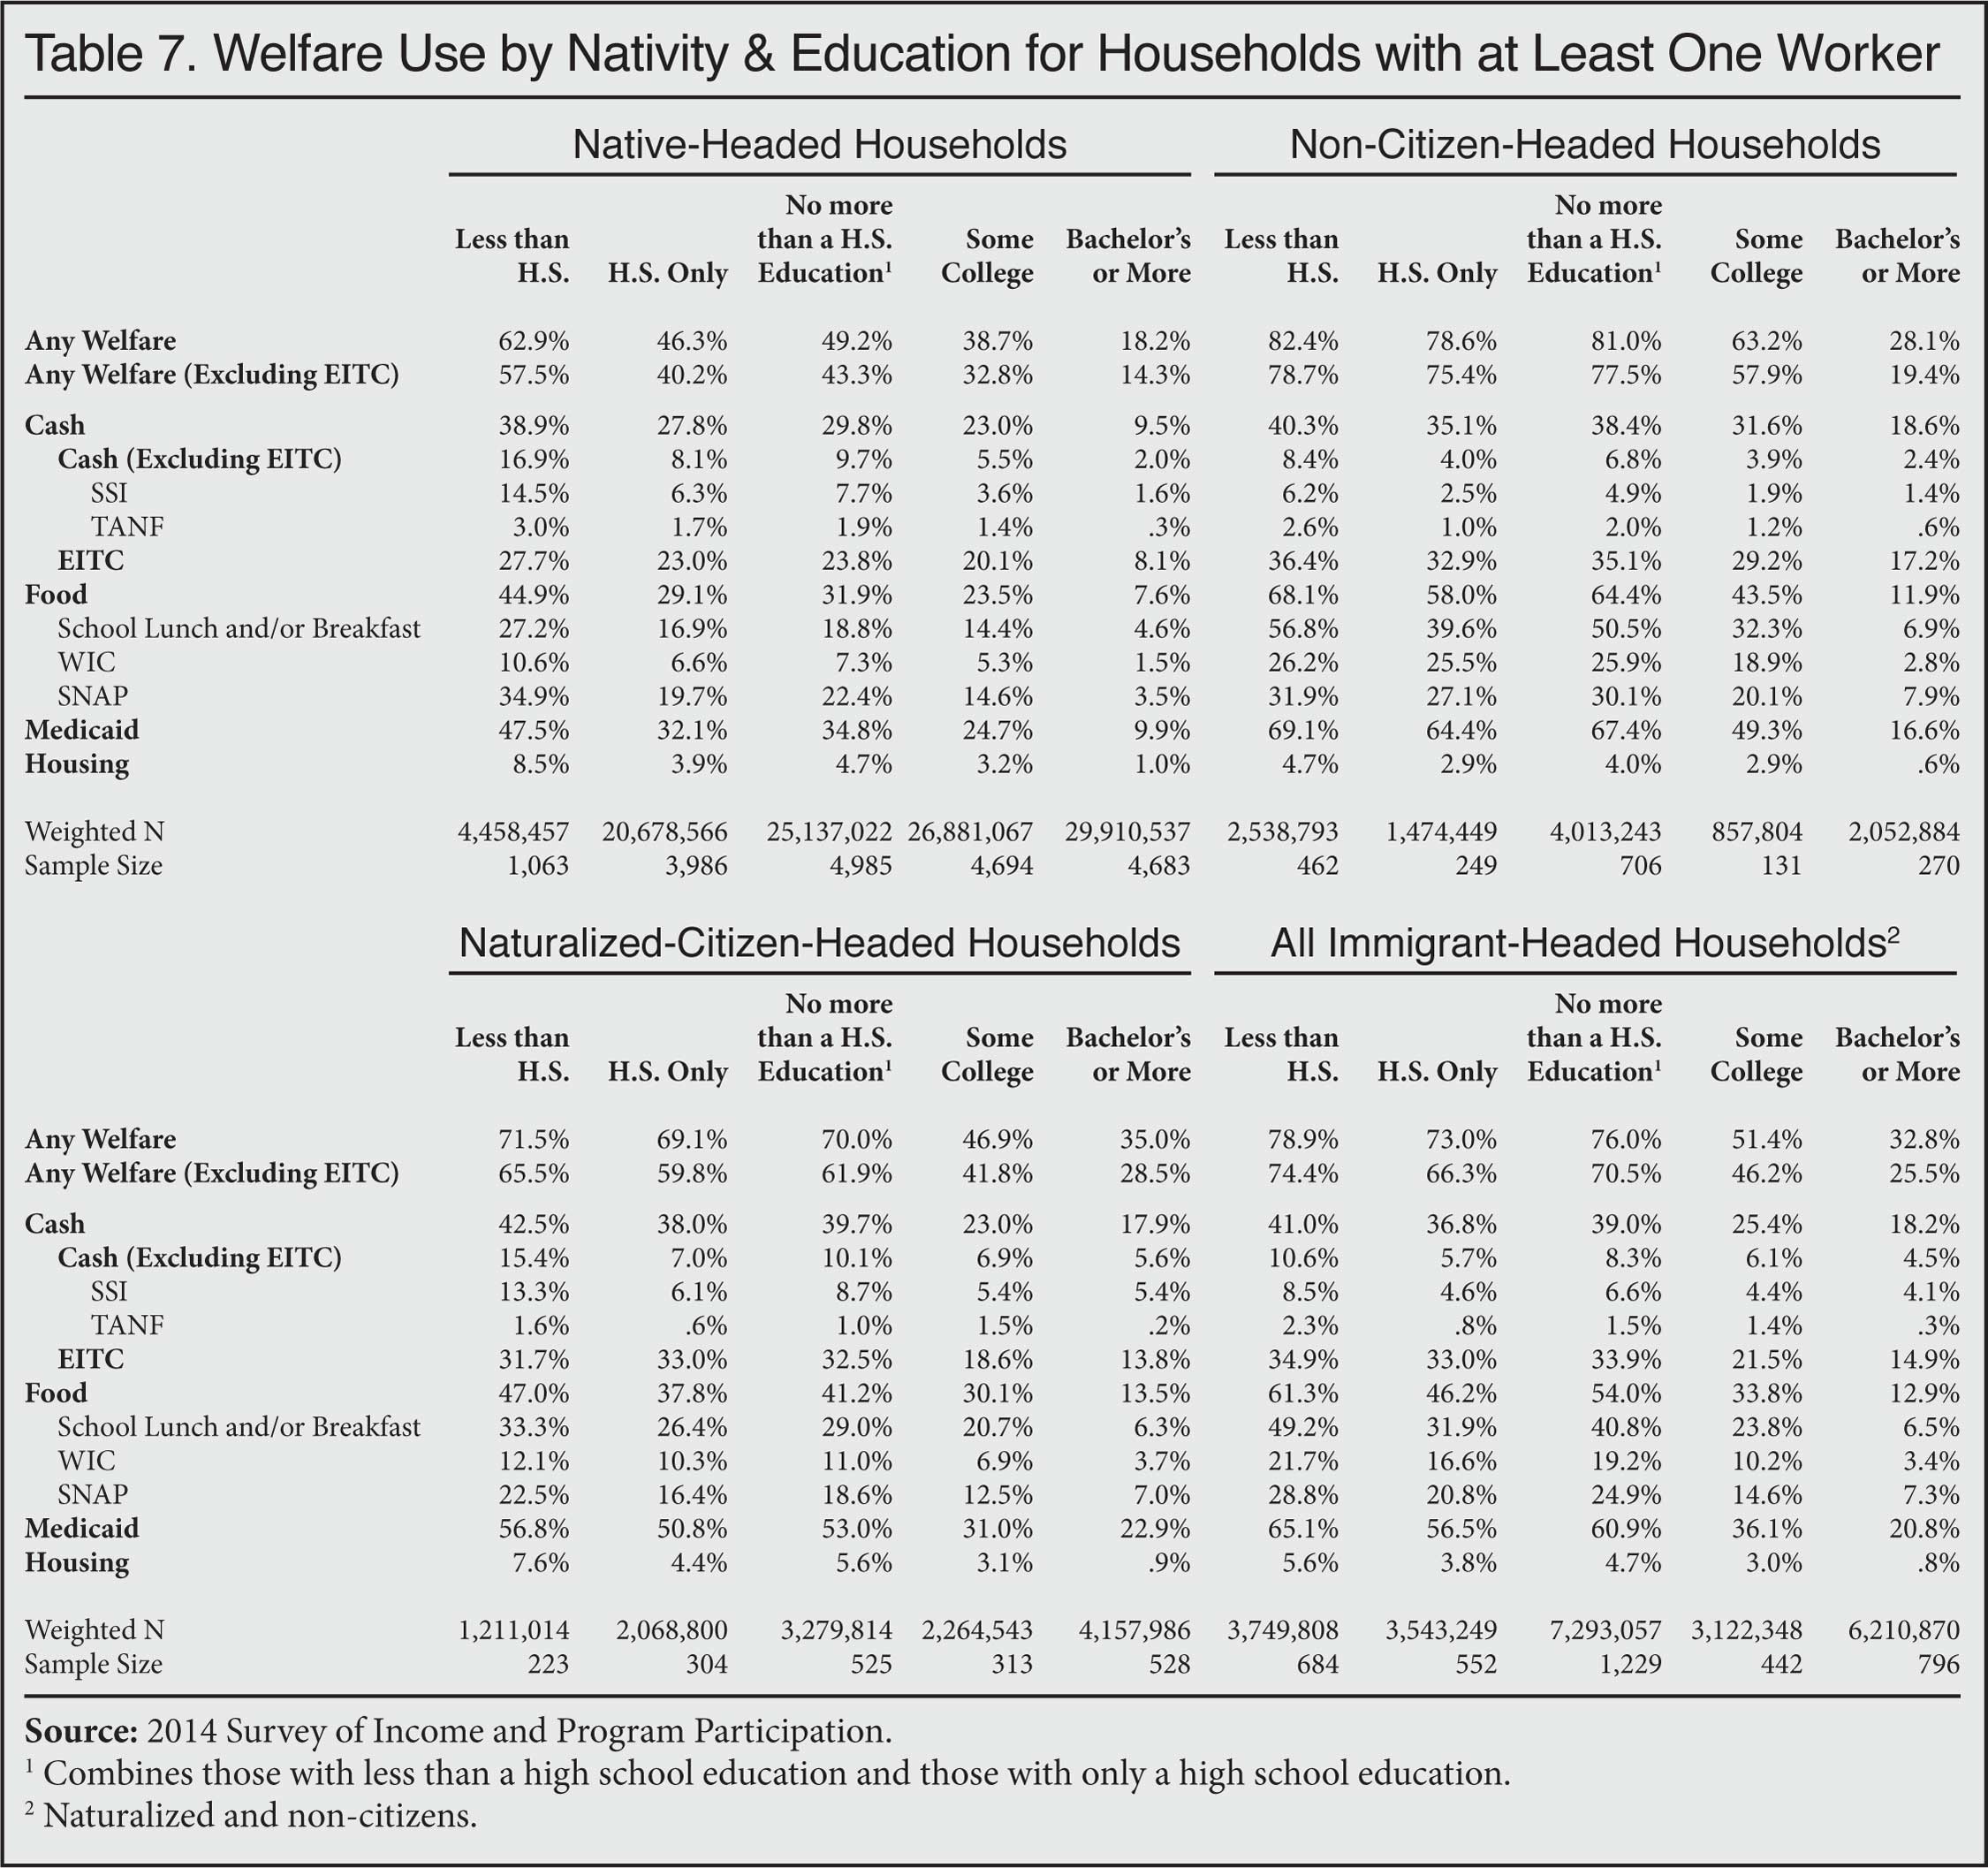 Table: Welfare use by nativity and education for households with at least one worker